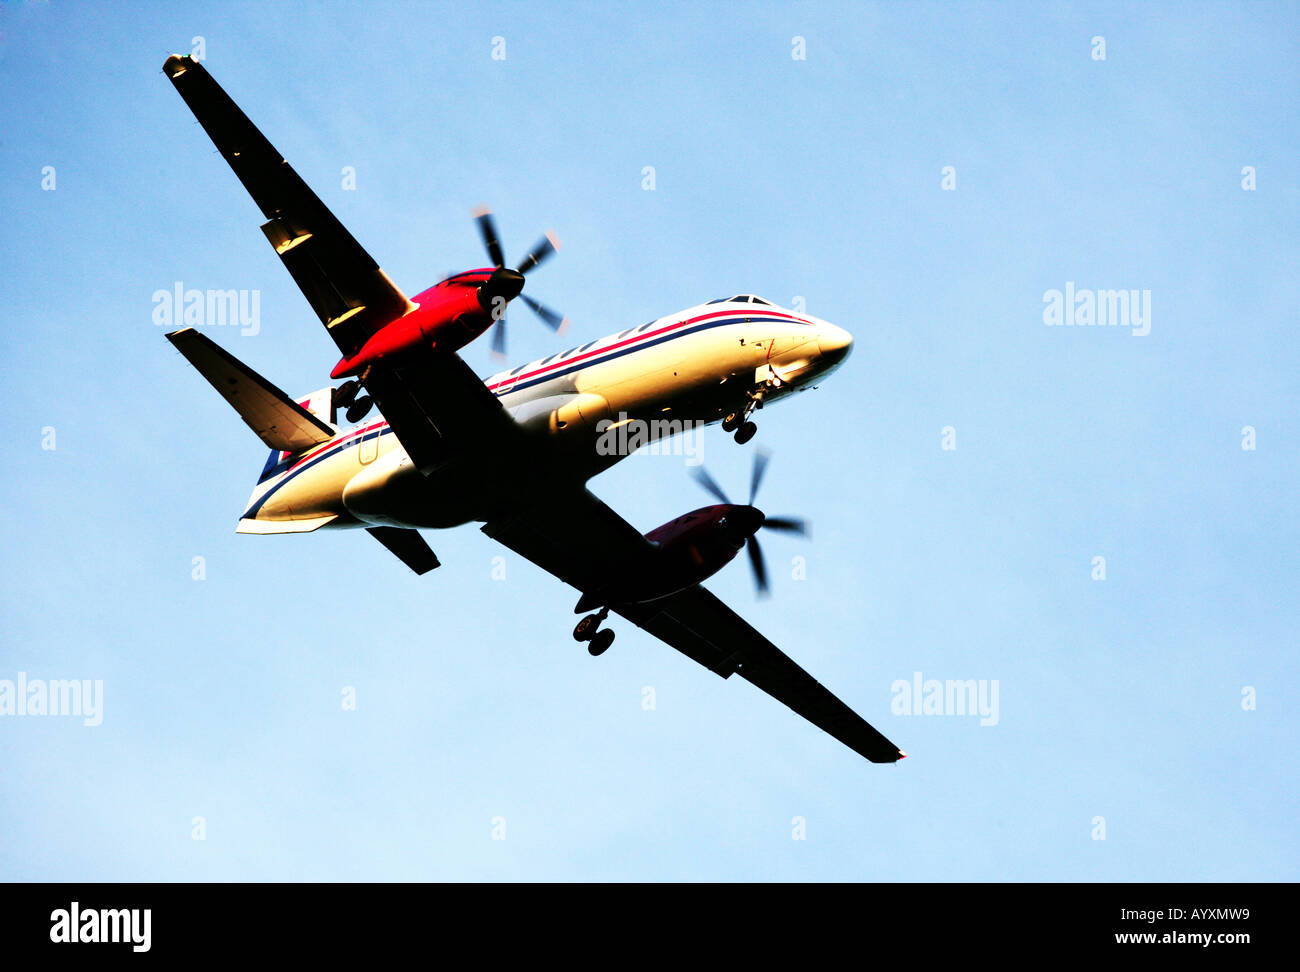 A landscape format image of a twin propeller aircraft with undercarriage down on final approach to land. Stock Photo